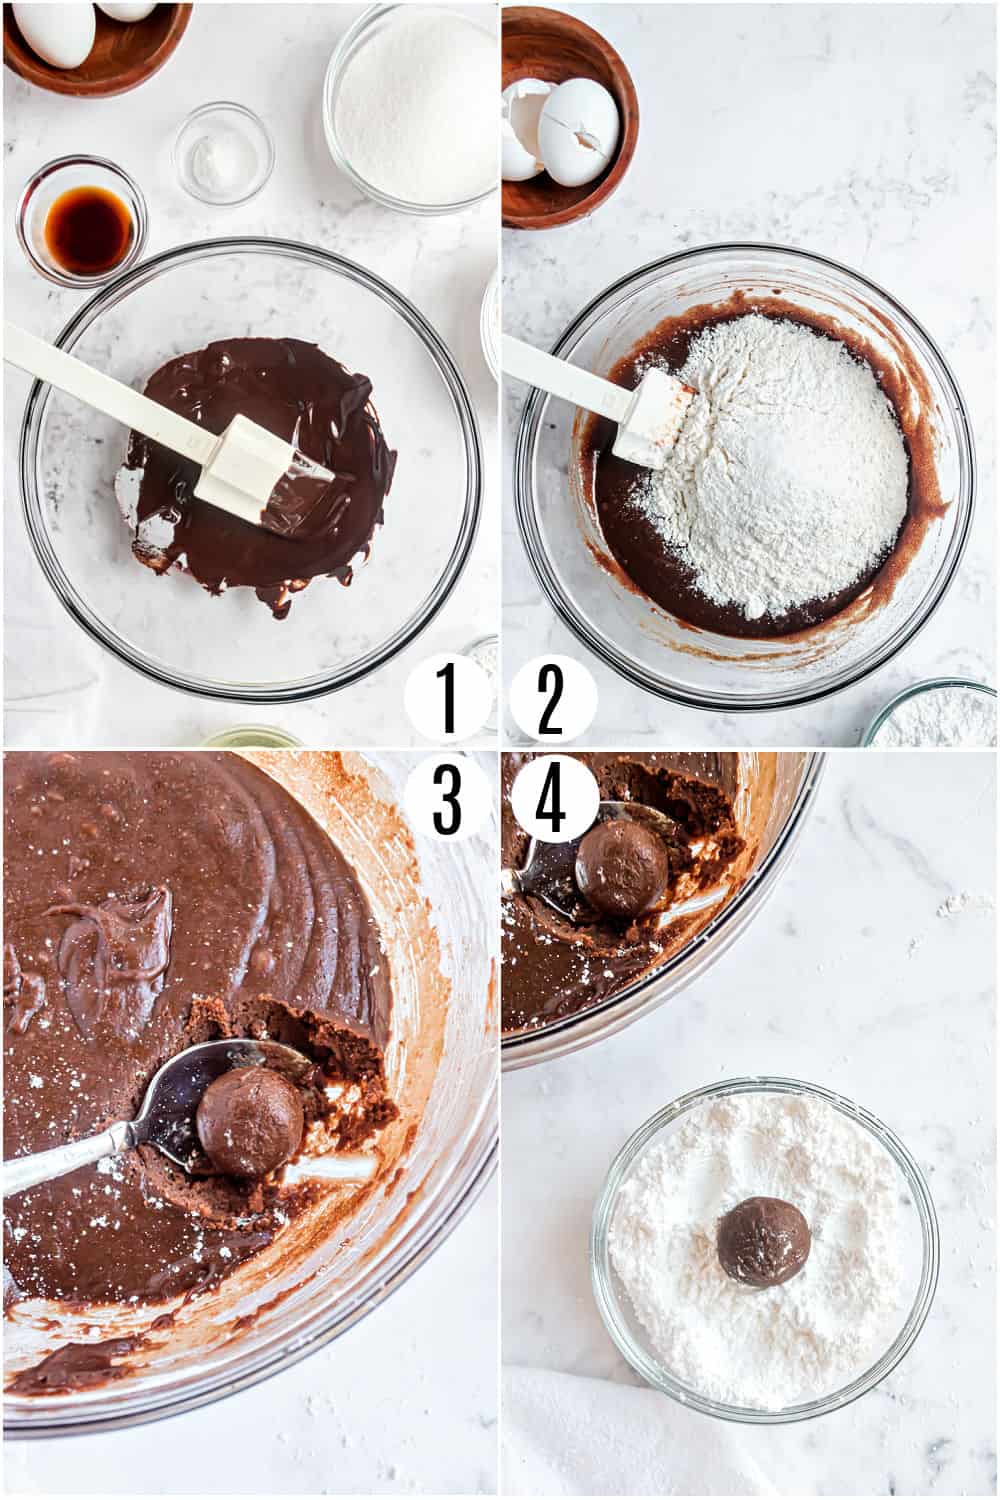 Step by step photos showing how to make chocolate crinkle cookies.